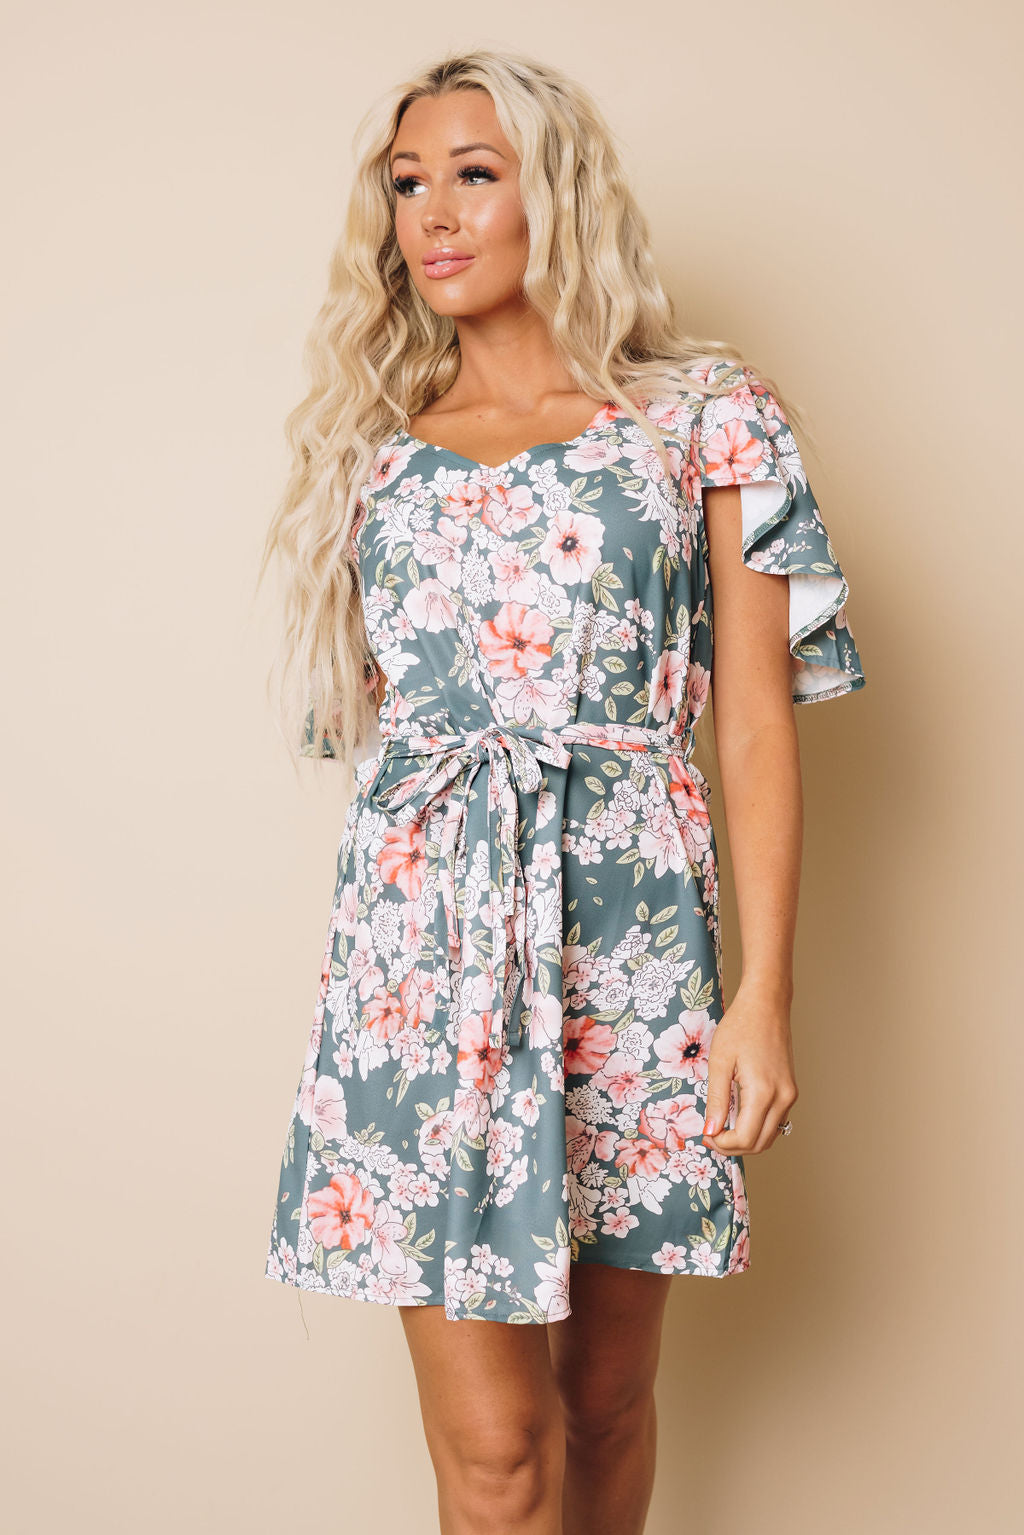 Hollow-out Back Floral Dress